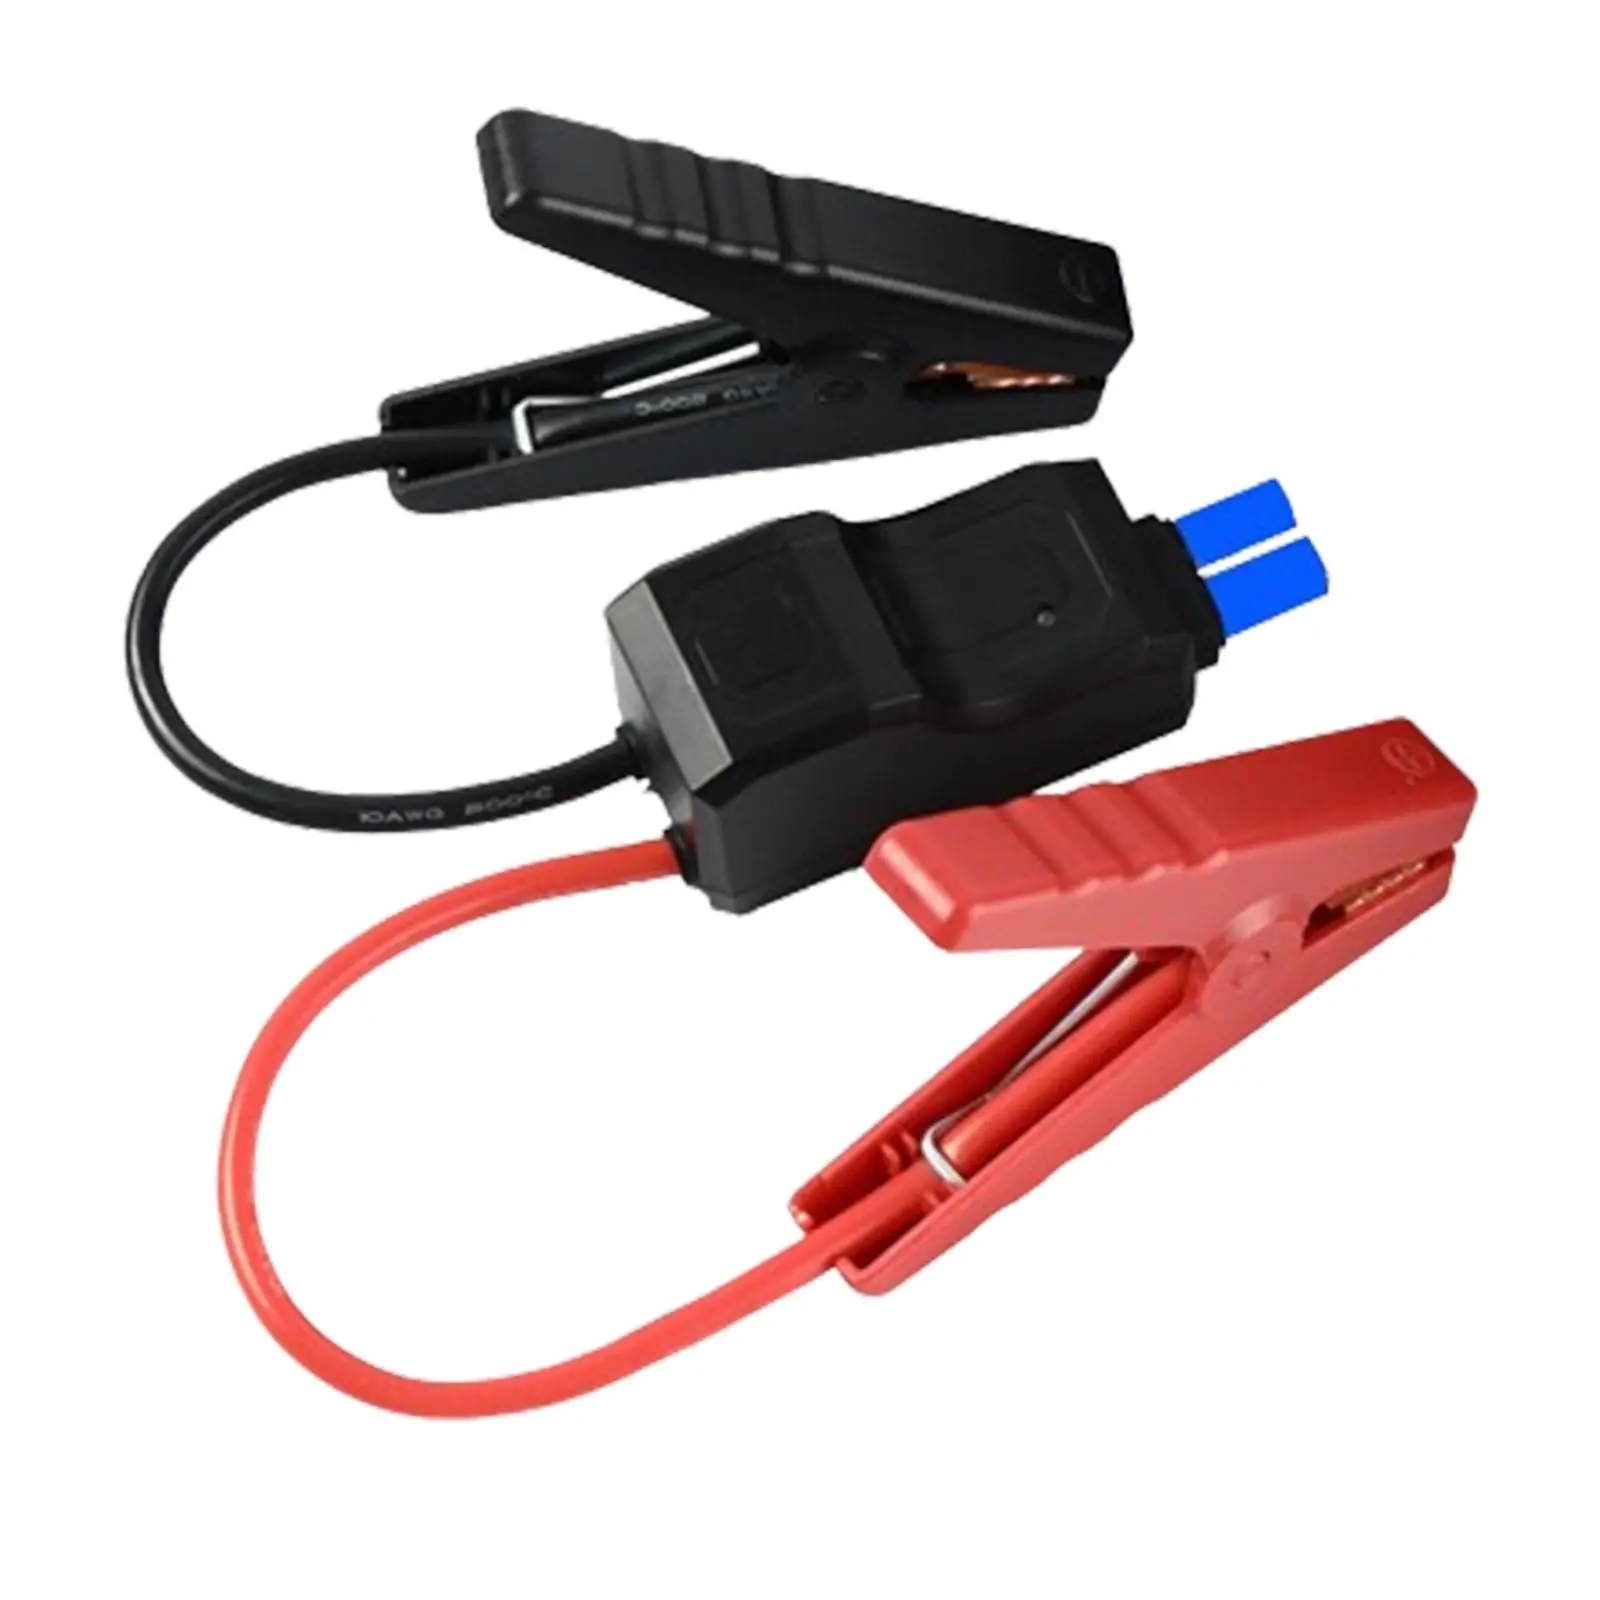 Generic Jump Starter Professional Easy to Use Portable Connector Replacement